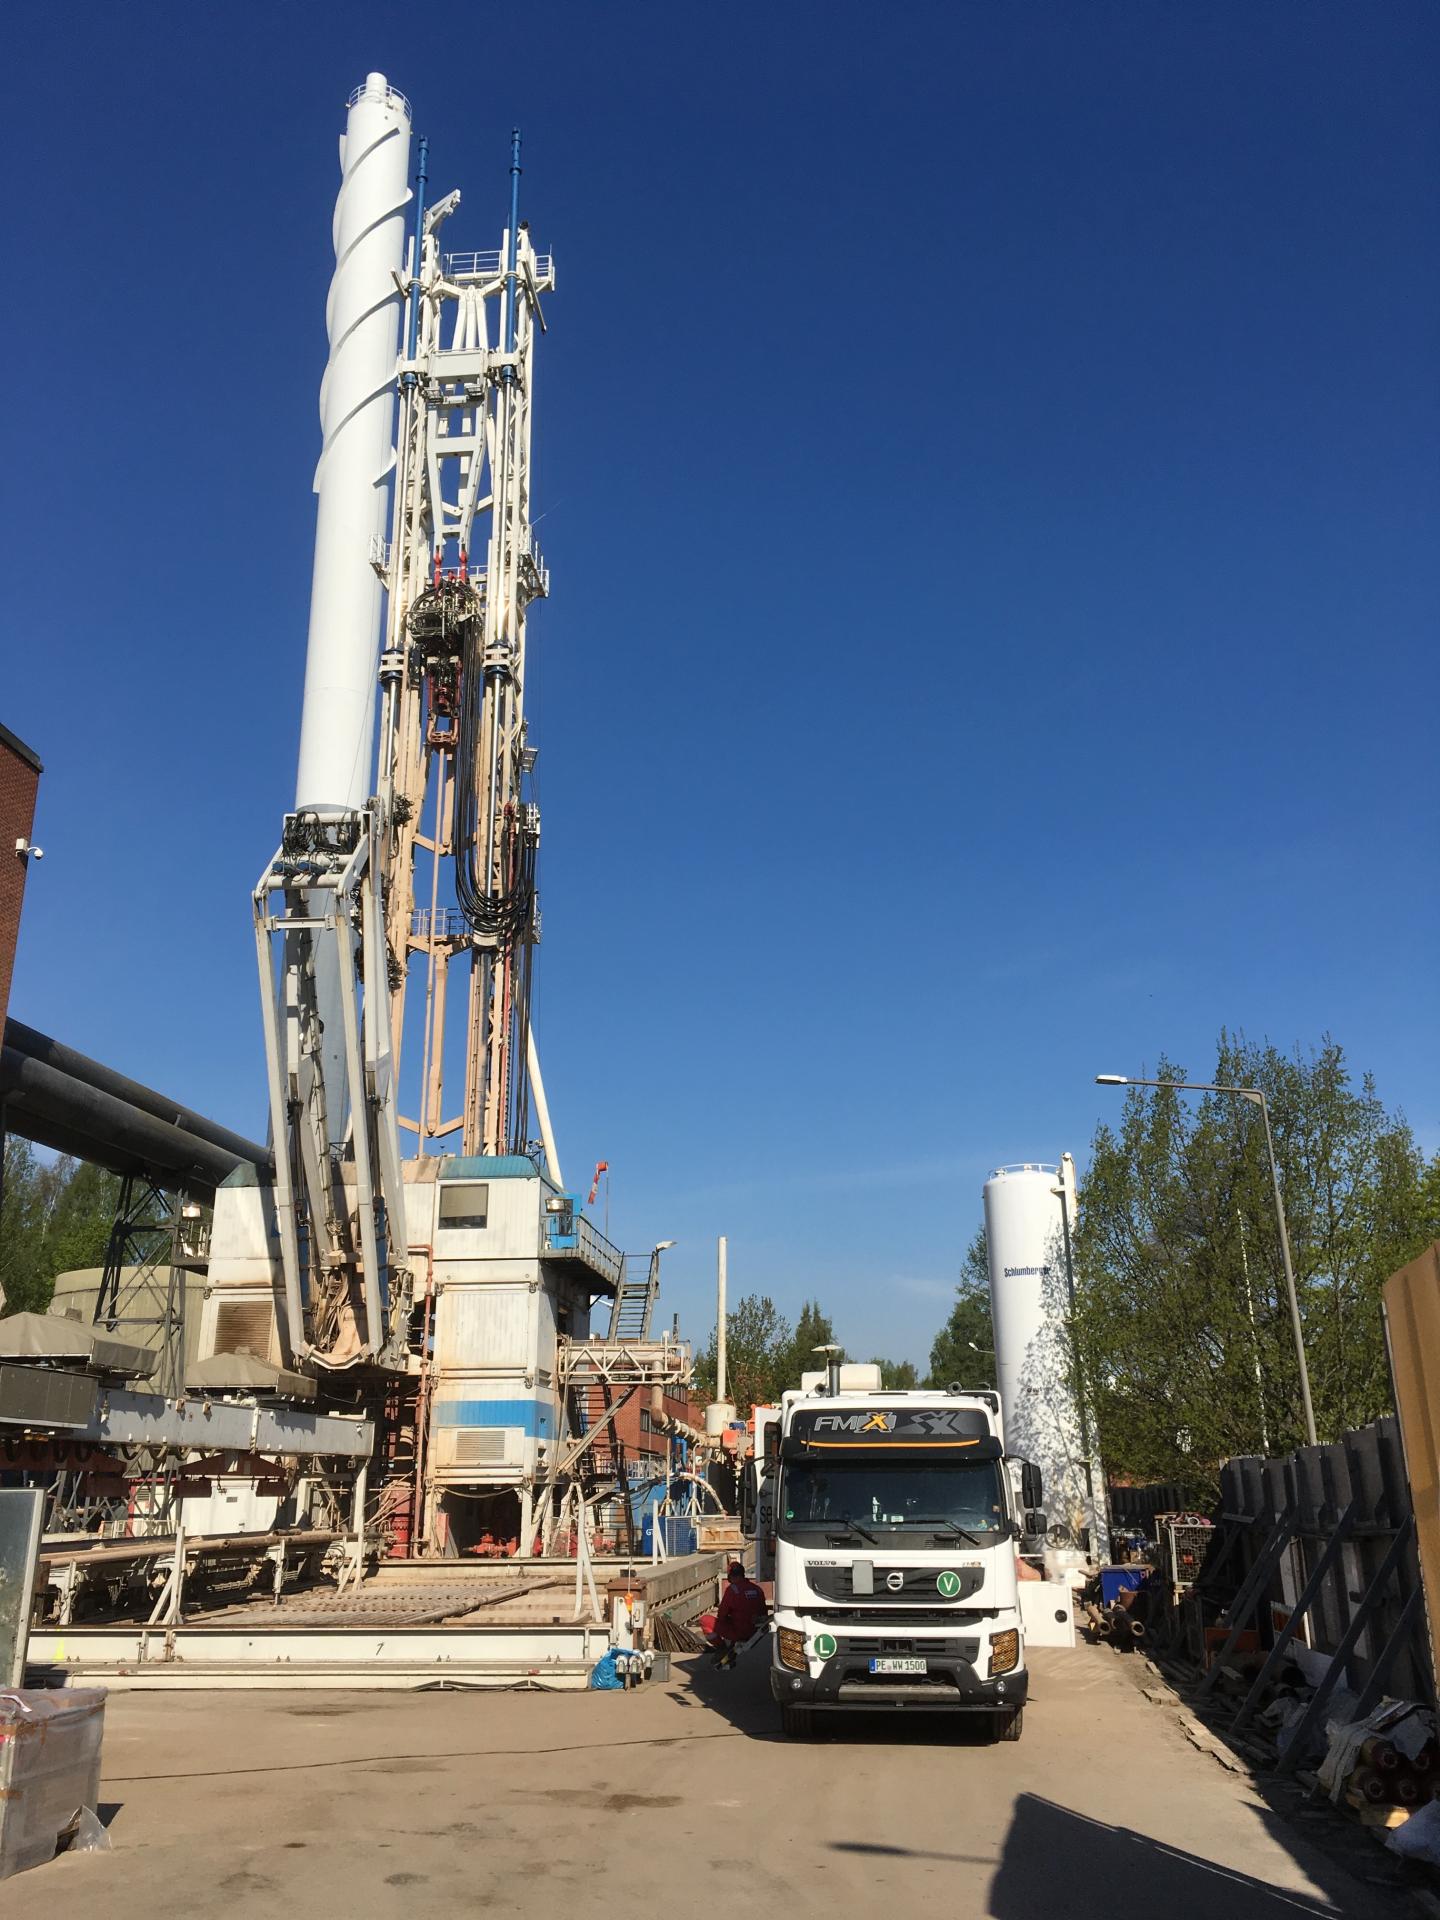 Drilling Rig of the Geothermal Project in Helsinki, Finland